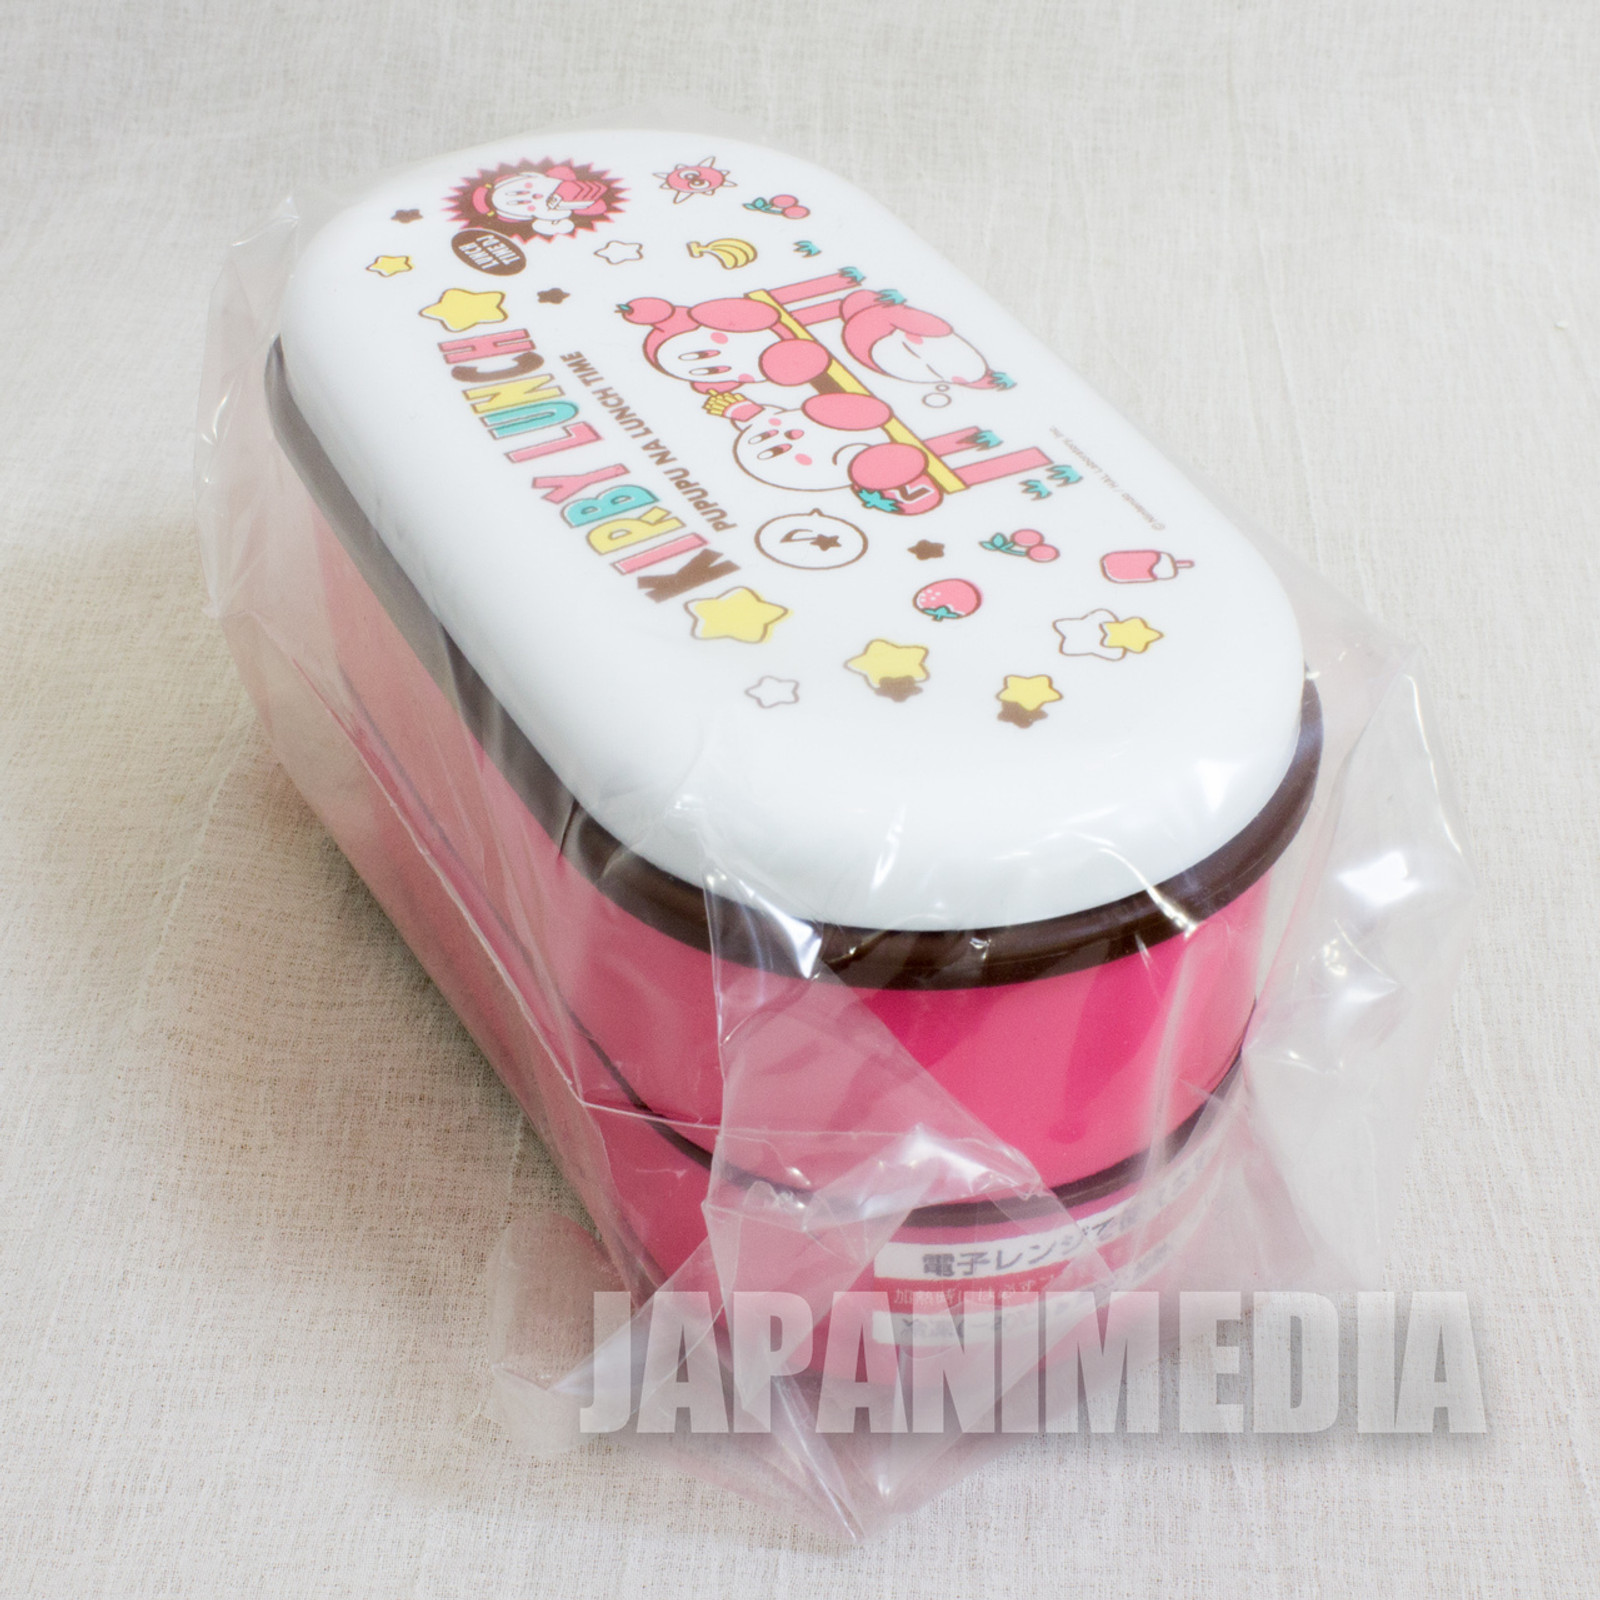 Kirby Super Star Lunch Box JAPAN GAME